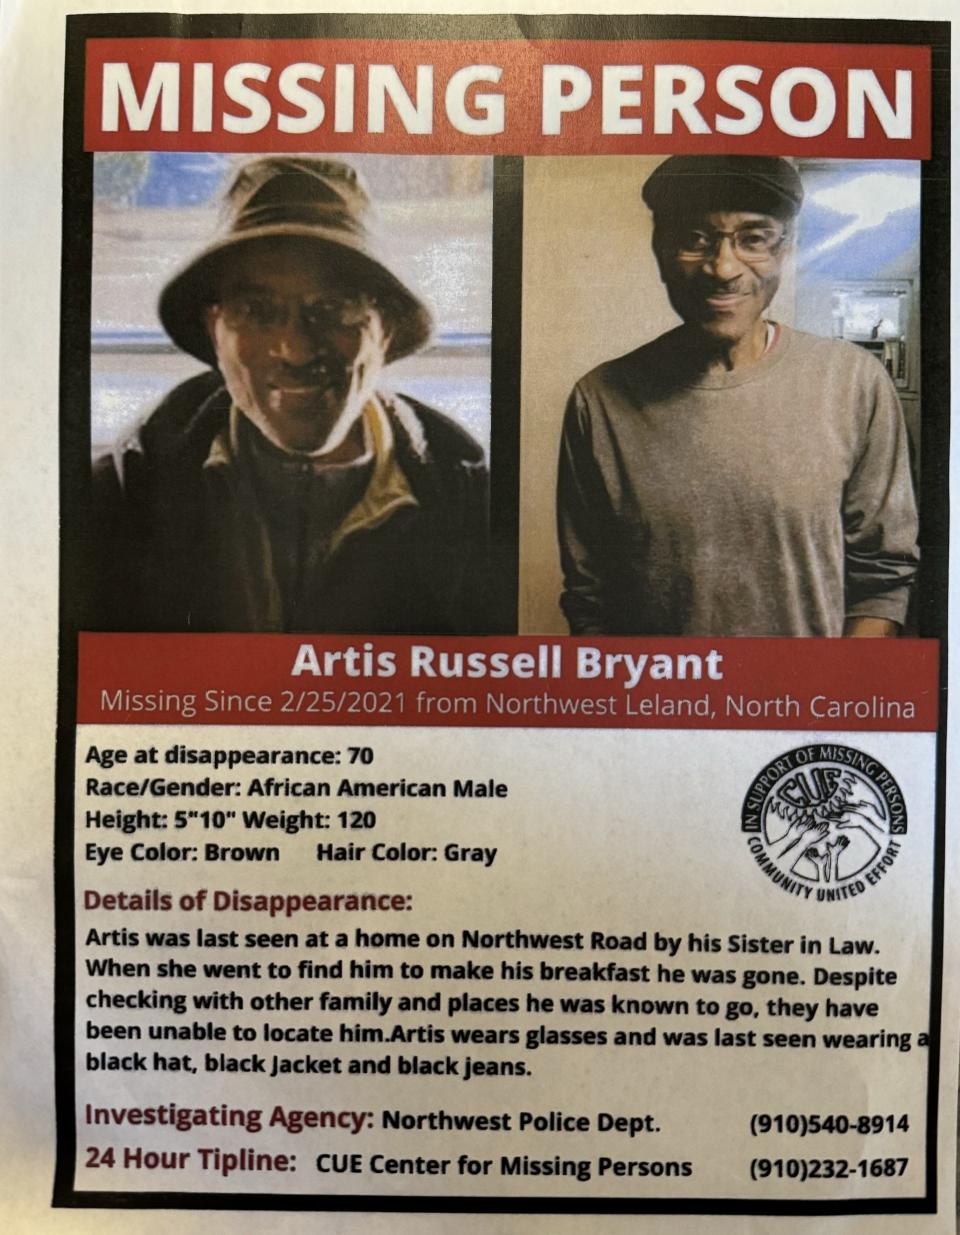 The Northwest Police Department and CUE Center for Missing Persons is offering a $10,000 cash reward for any tipster who can provide information leading to the direct location and recovery of Artis Russell Bryant, a 73-year-old male who went missing after returning to his residence on the morning of Feb. 26, 2021.